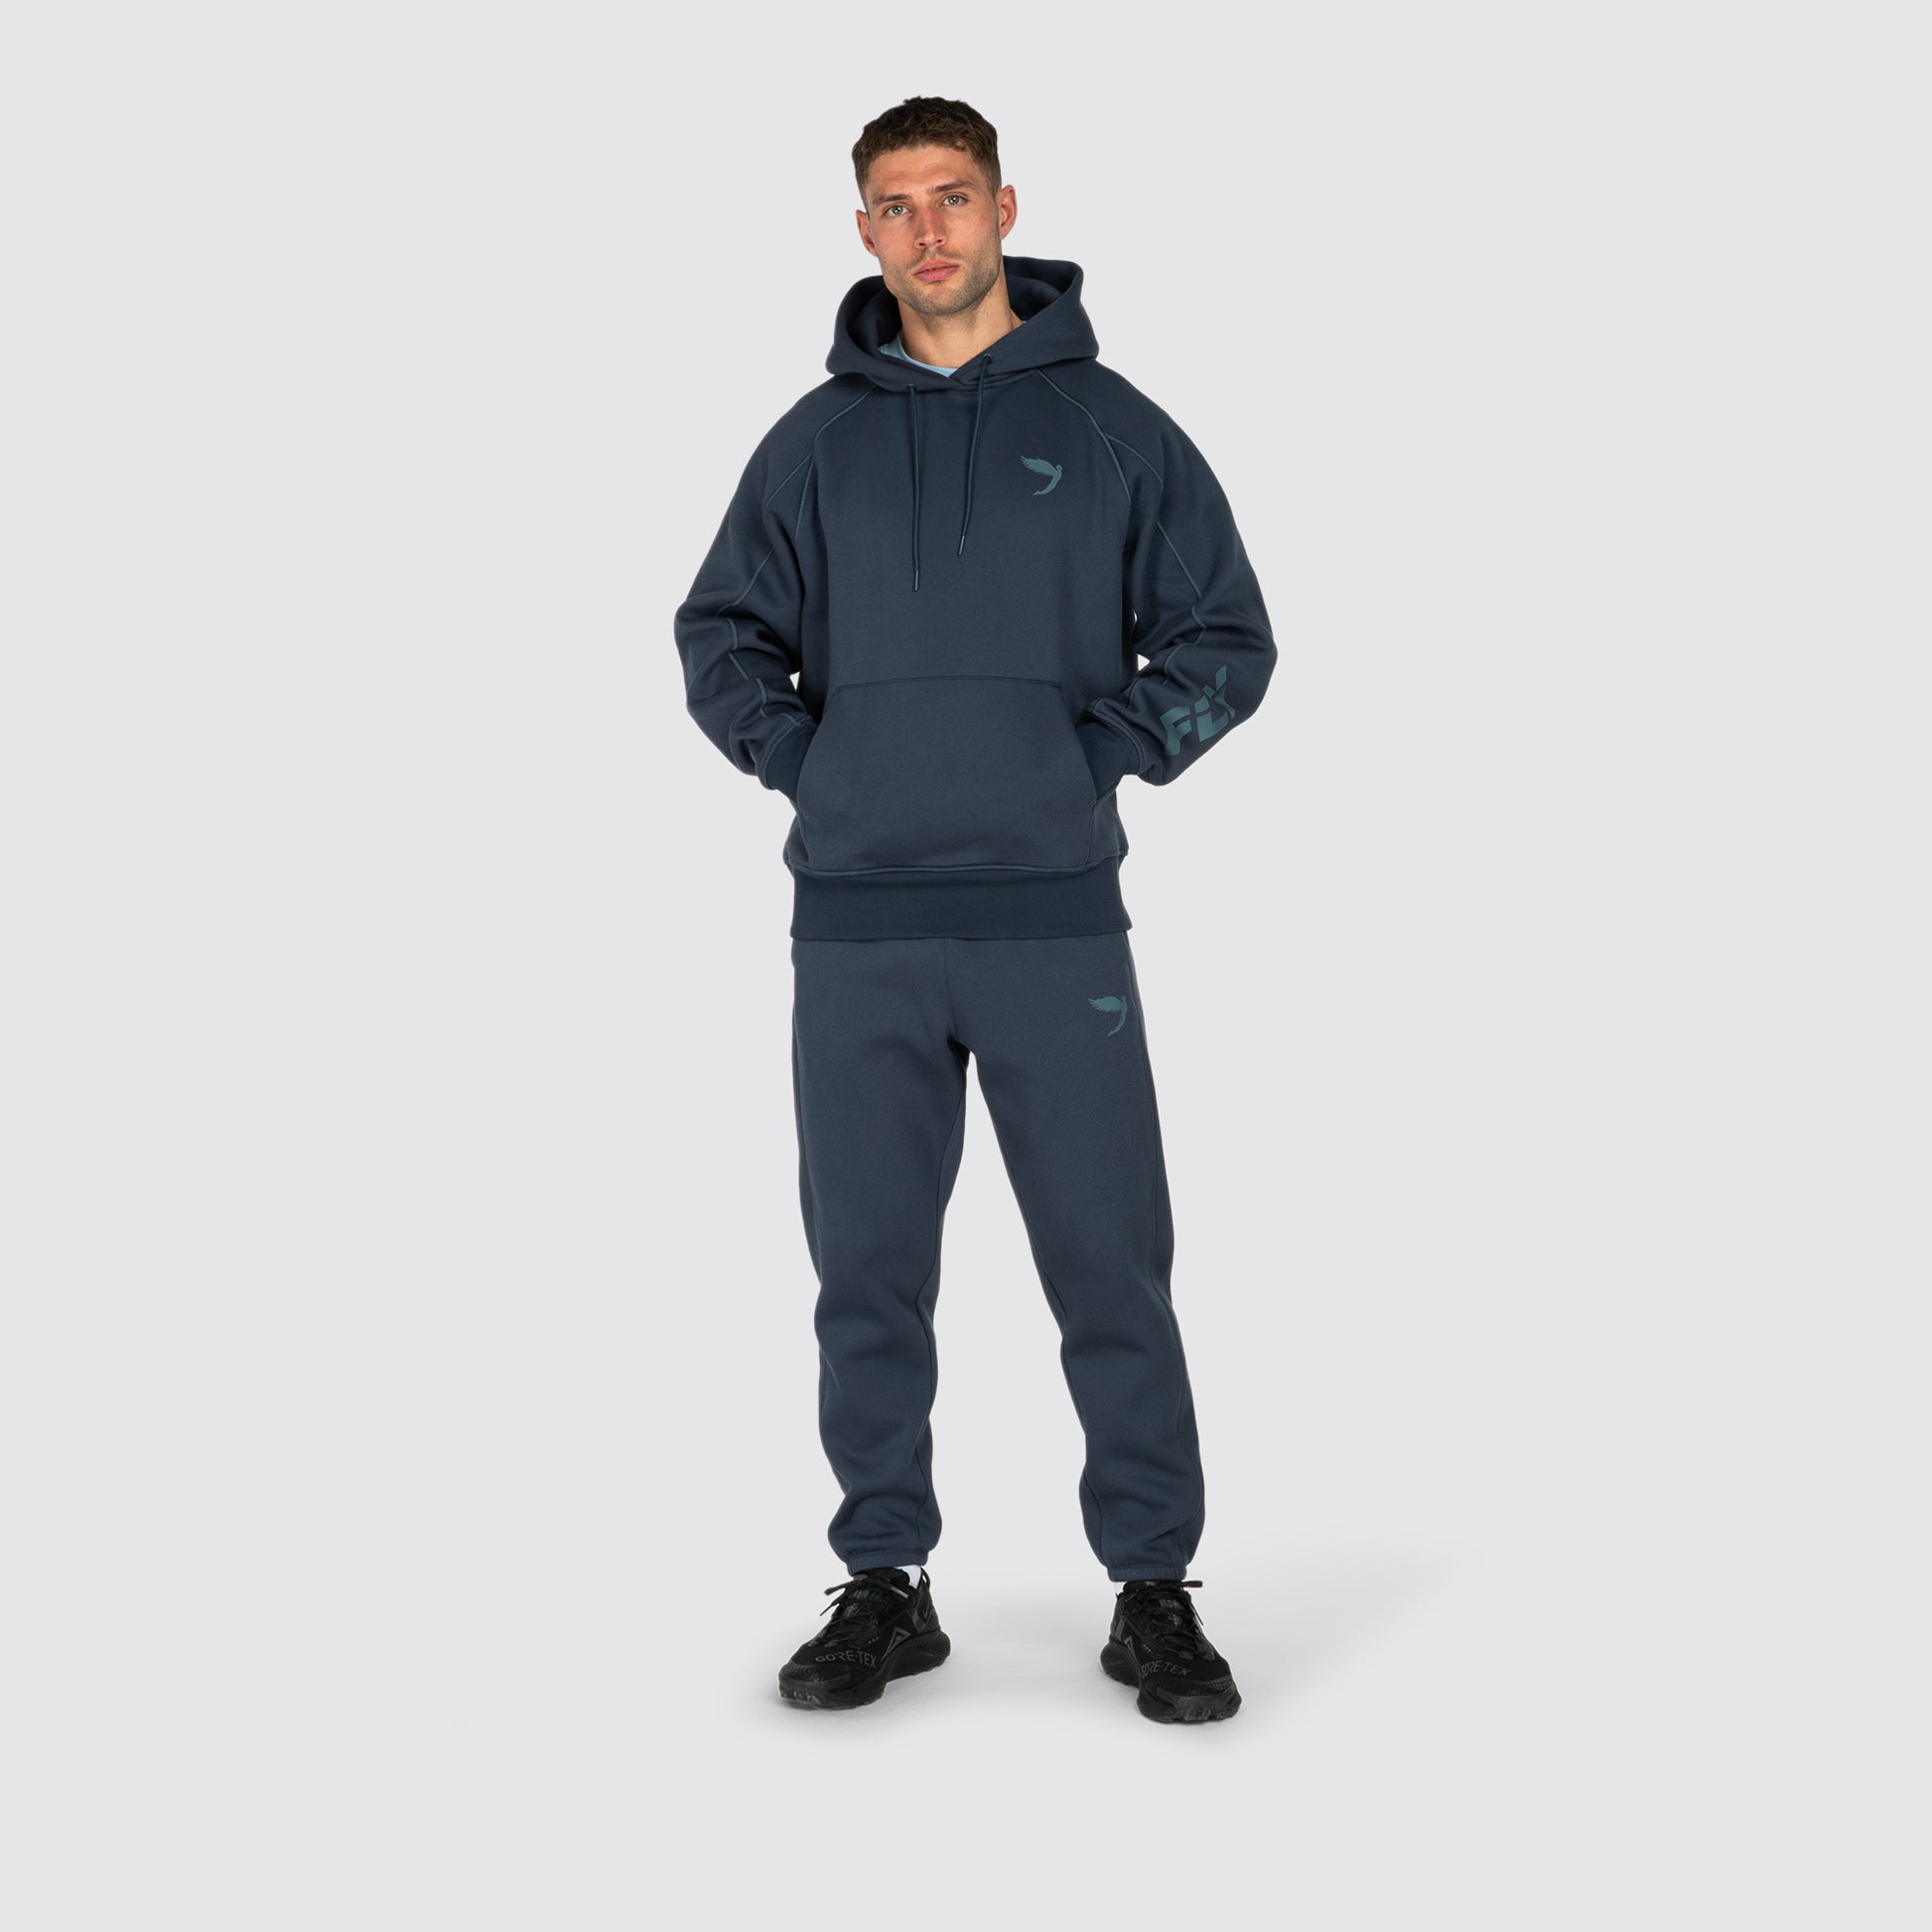 Undisputed Relaxed Fit Joggers (8244016185596)